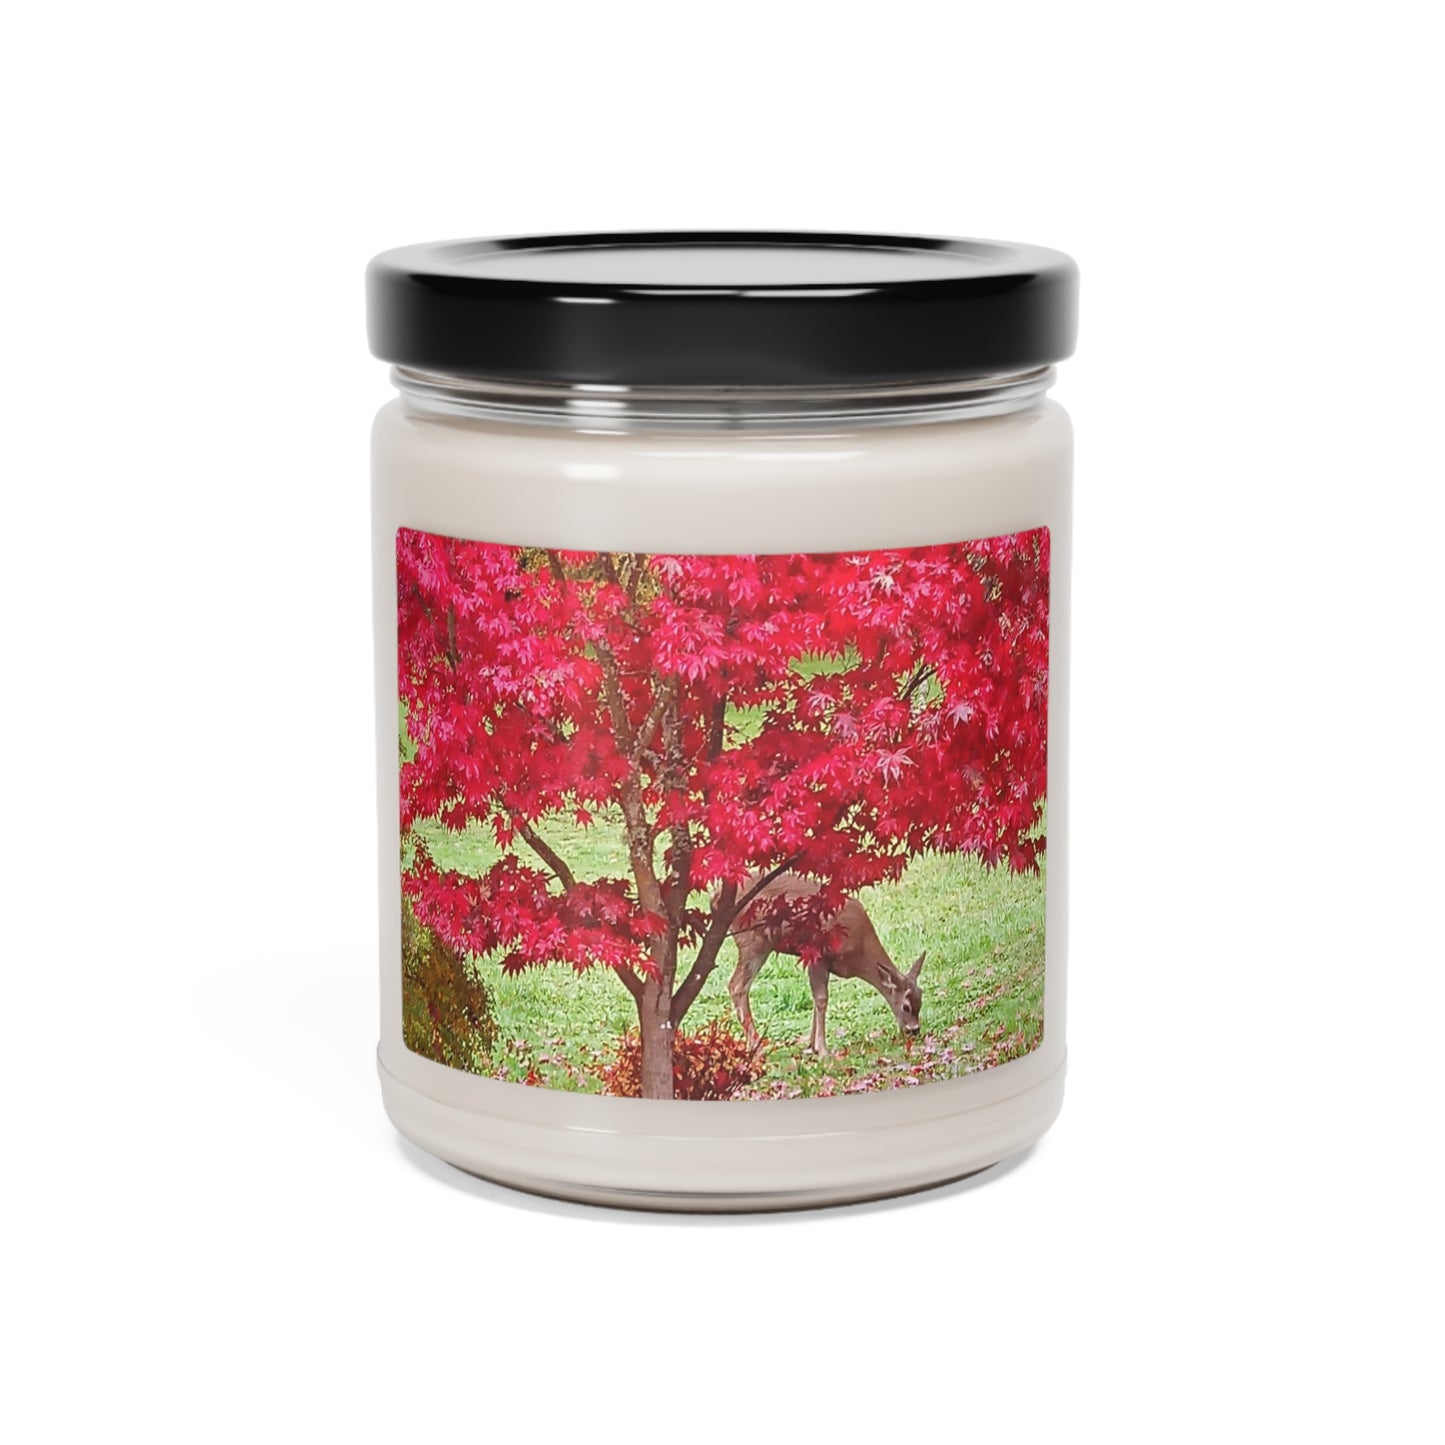 Autumn Deer Scented Soy Candle, 9oz